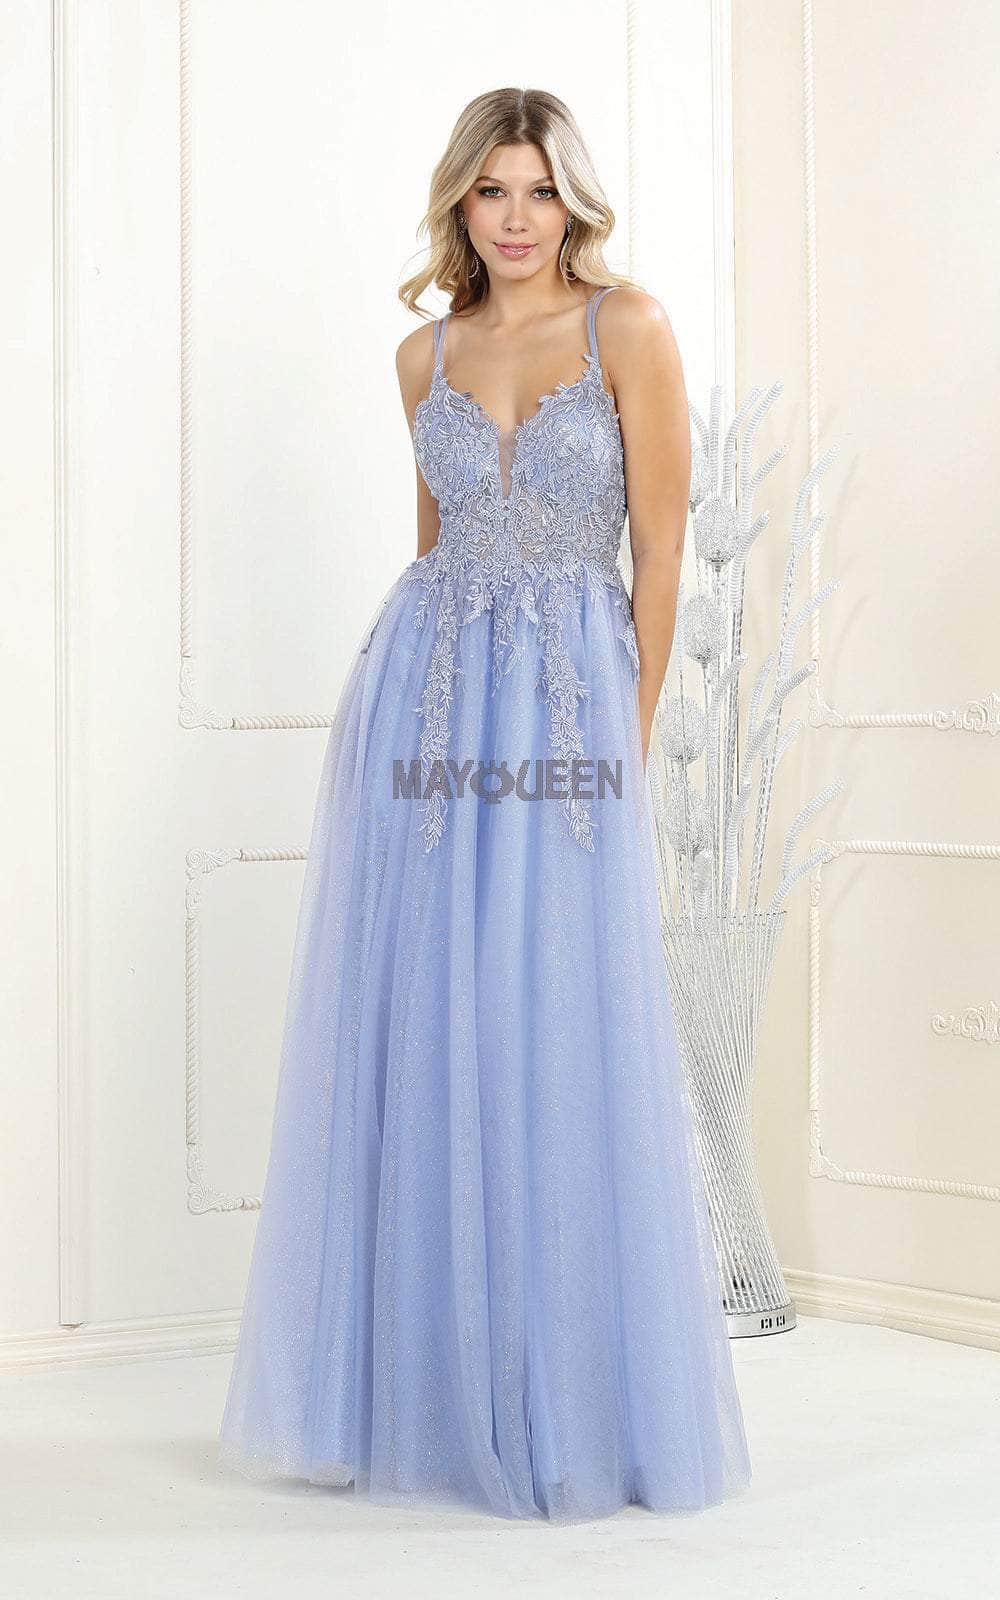 Image of May Queen RQ7957 - Multicolor Beaded Illusion Gown